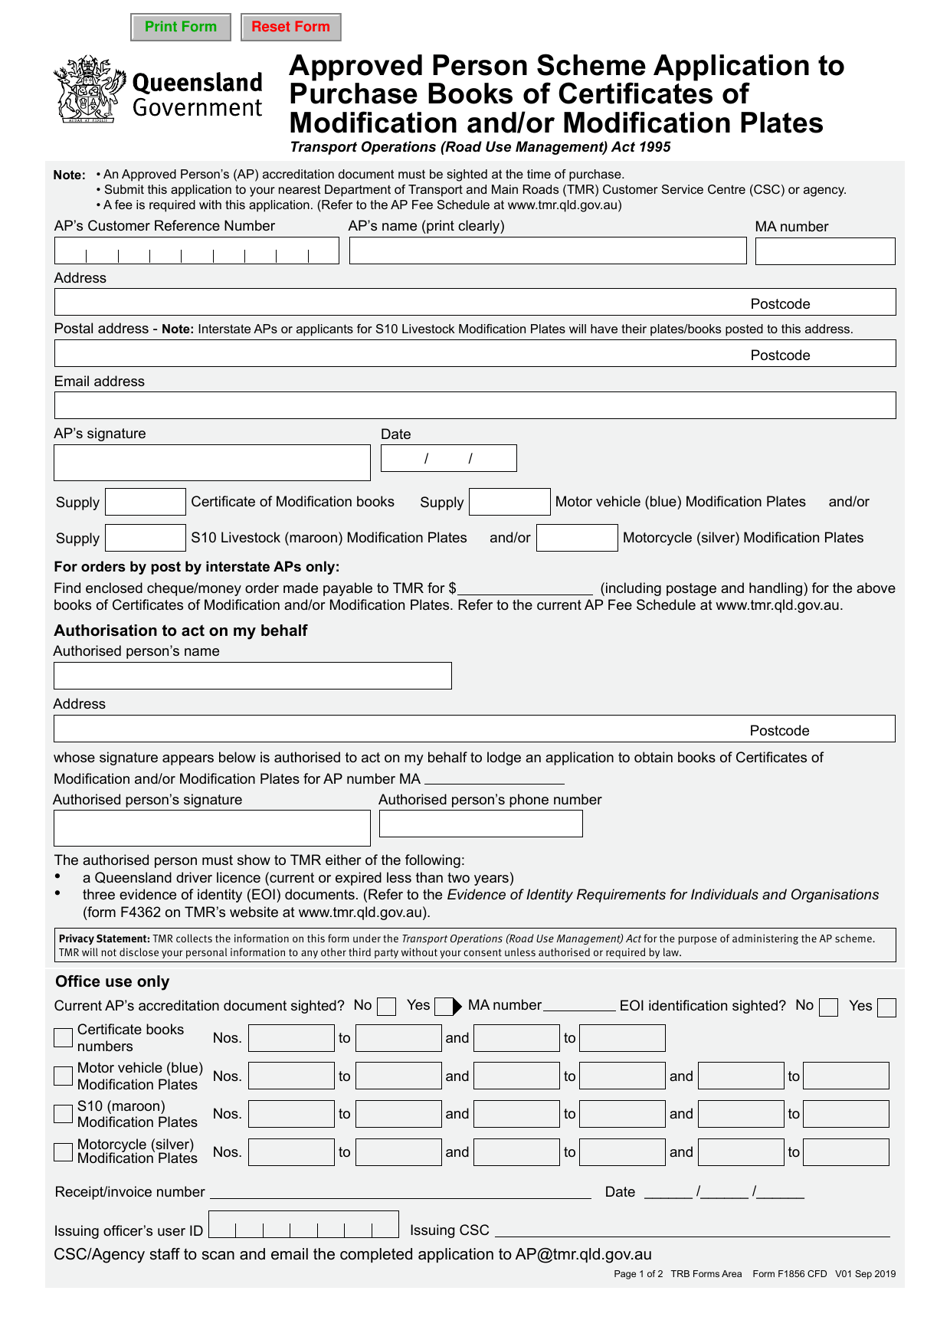 Form F1856 Approved Person Scheme Application to Purchase Books of Certificates of Modification and / or Modification Plates - Queensland, Australia, Page 1